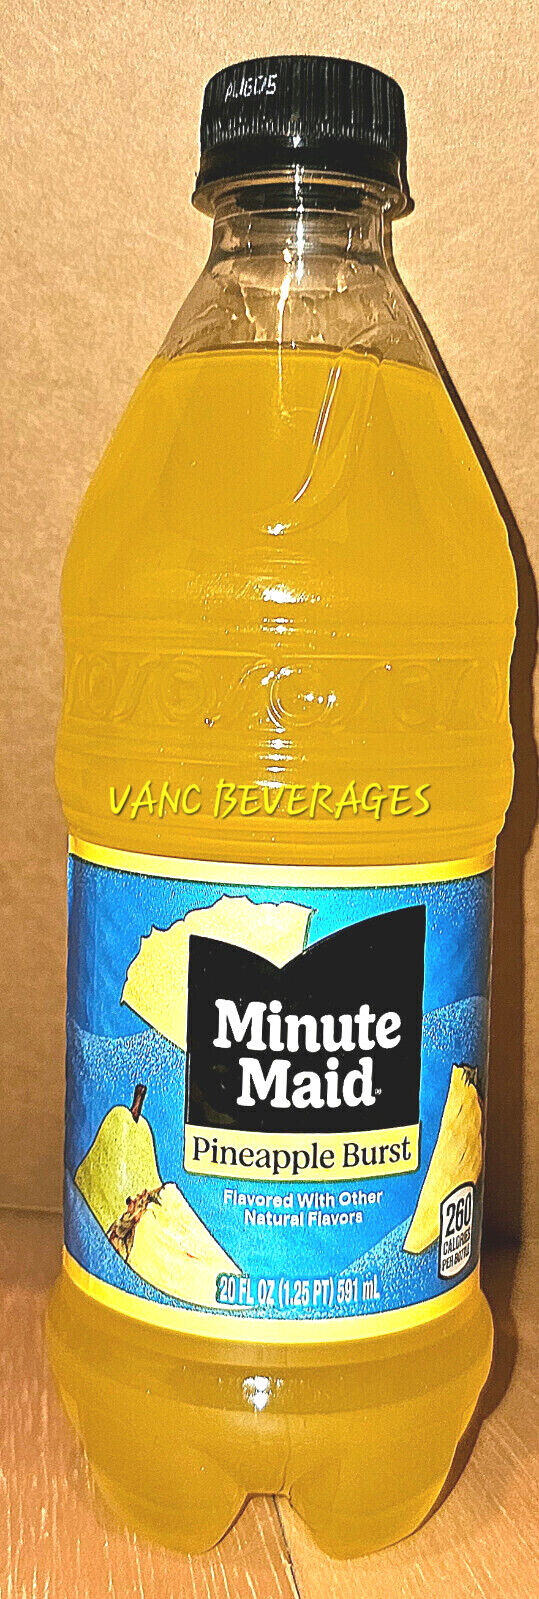 NEW Minute Maid Pineapple Burst juice drink.1 or 2 bottles with  8/24